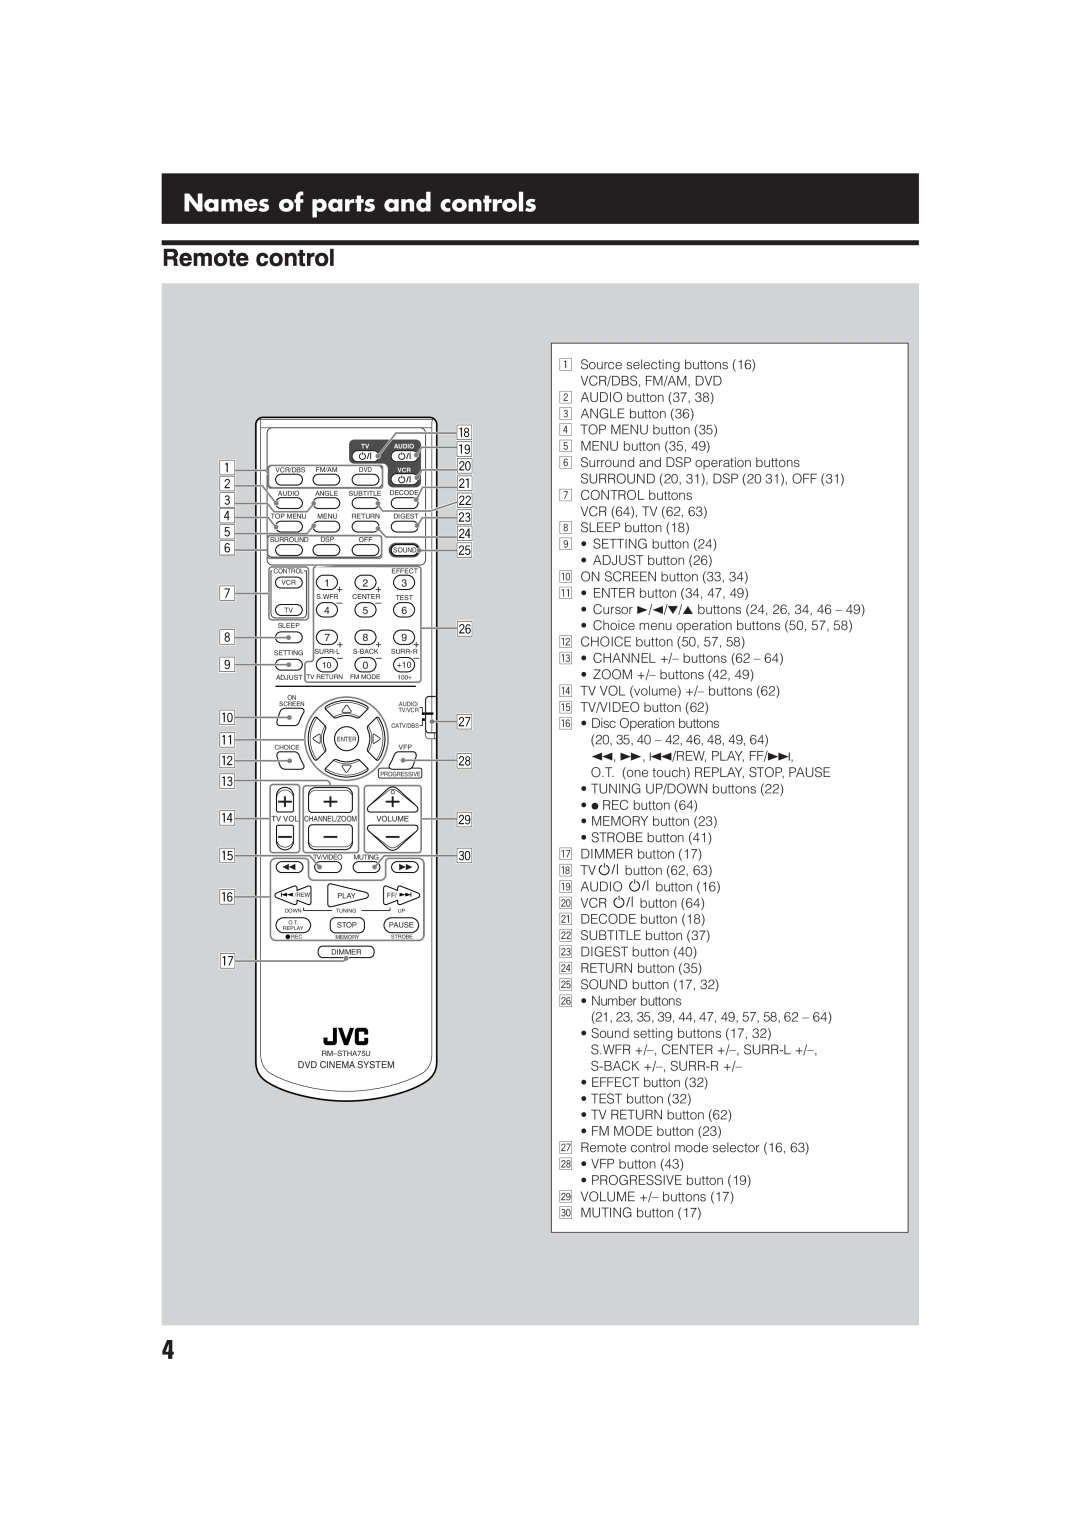 JVC TH-A75 manual Names of parts and controls, Remote control 